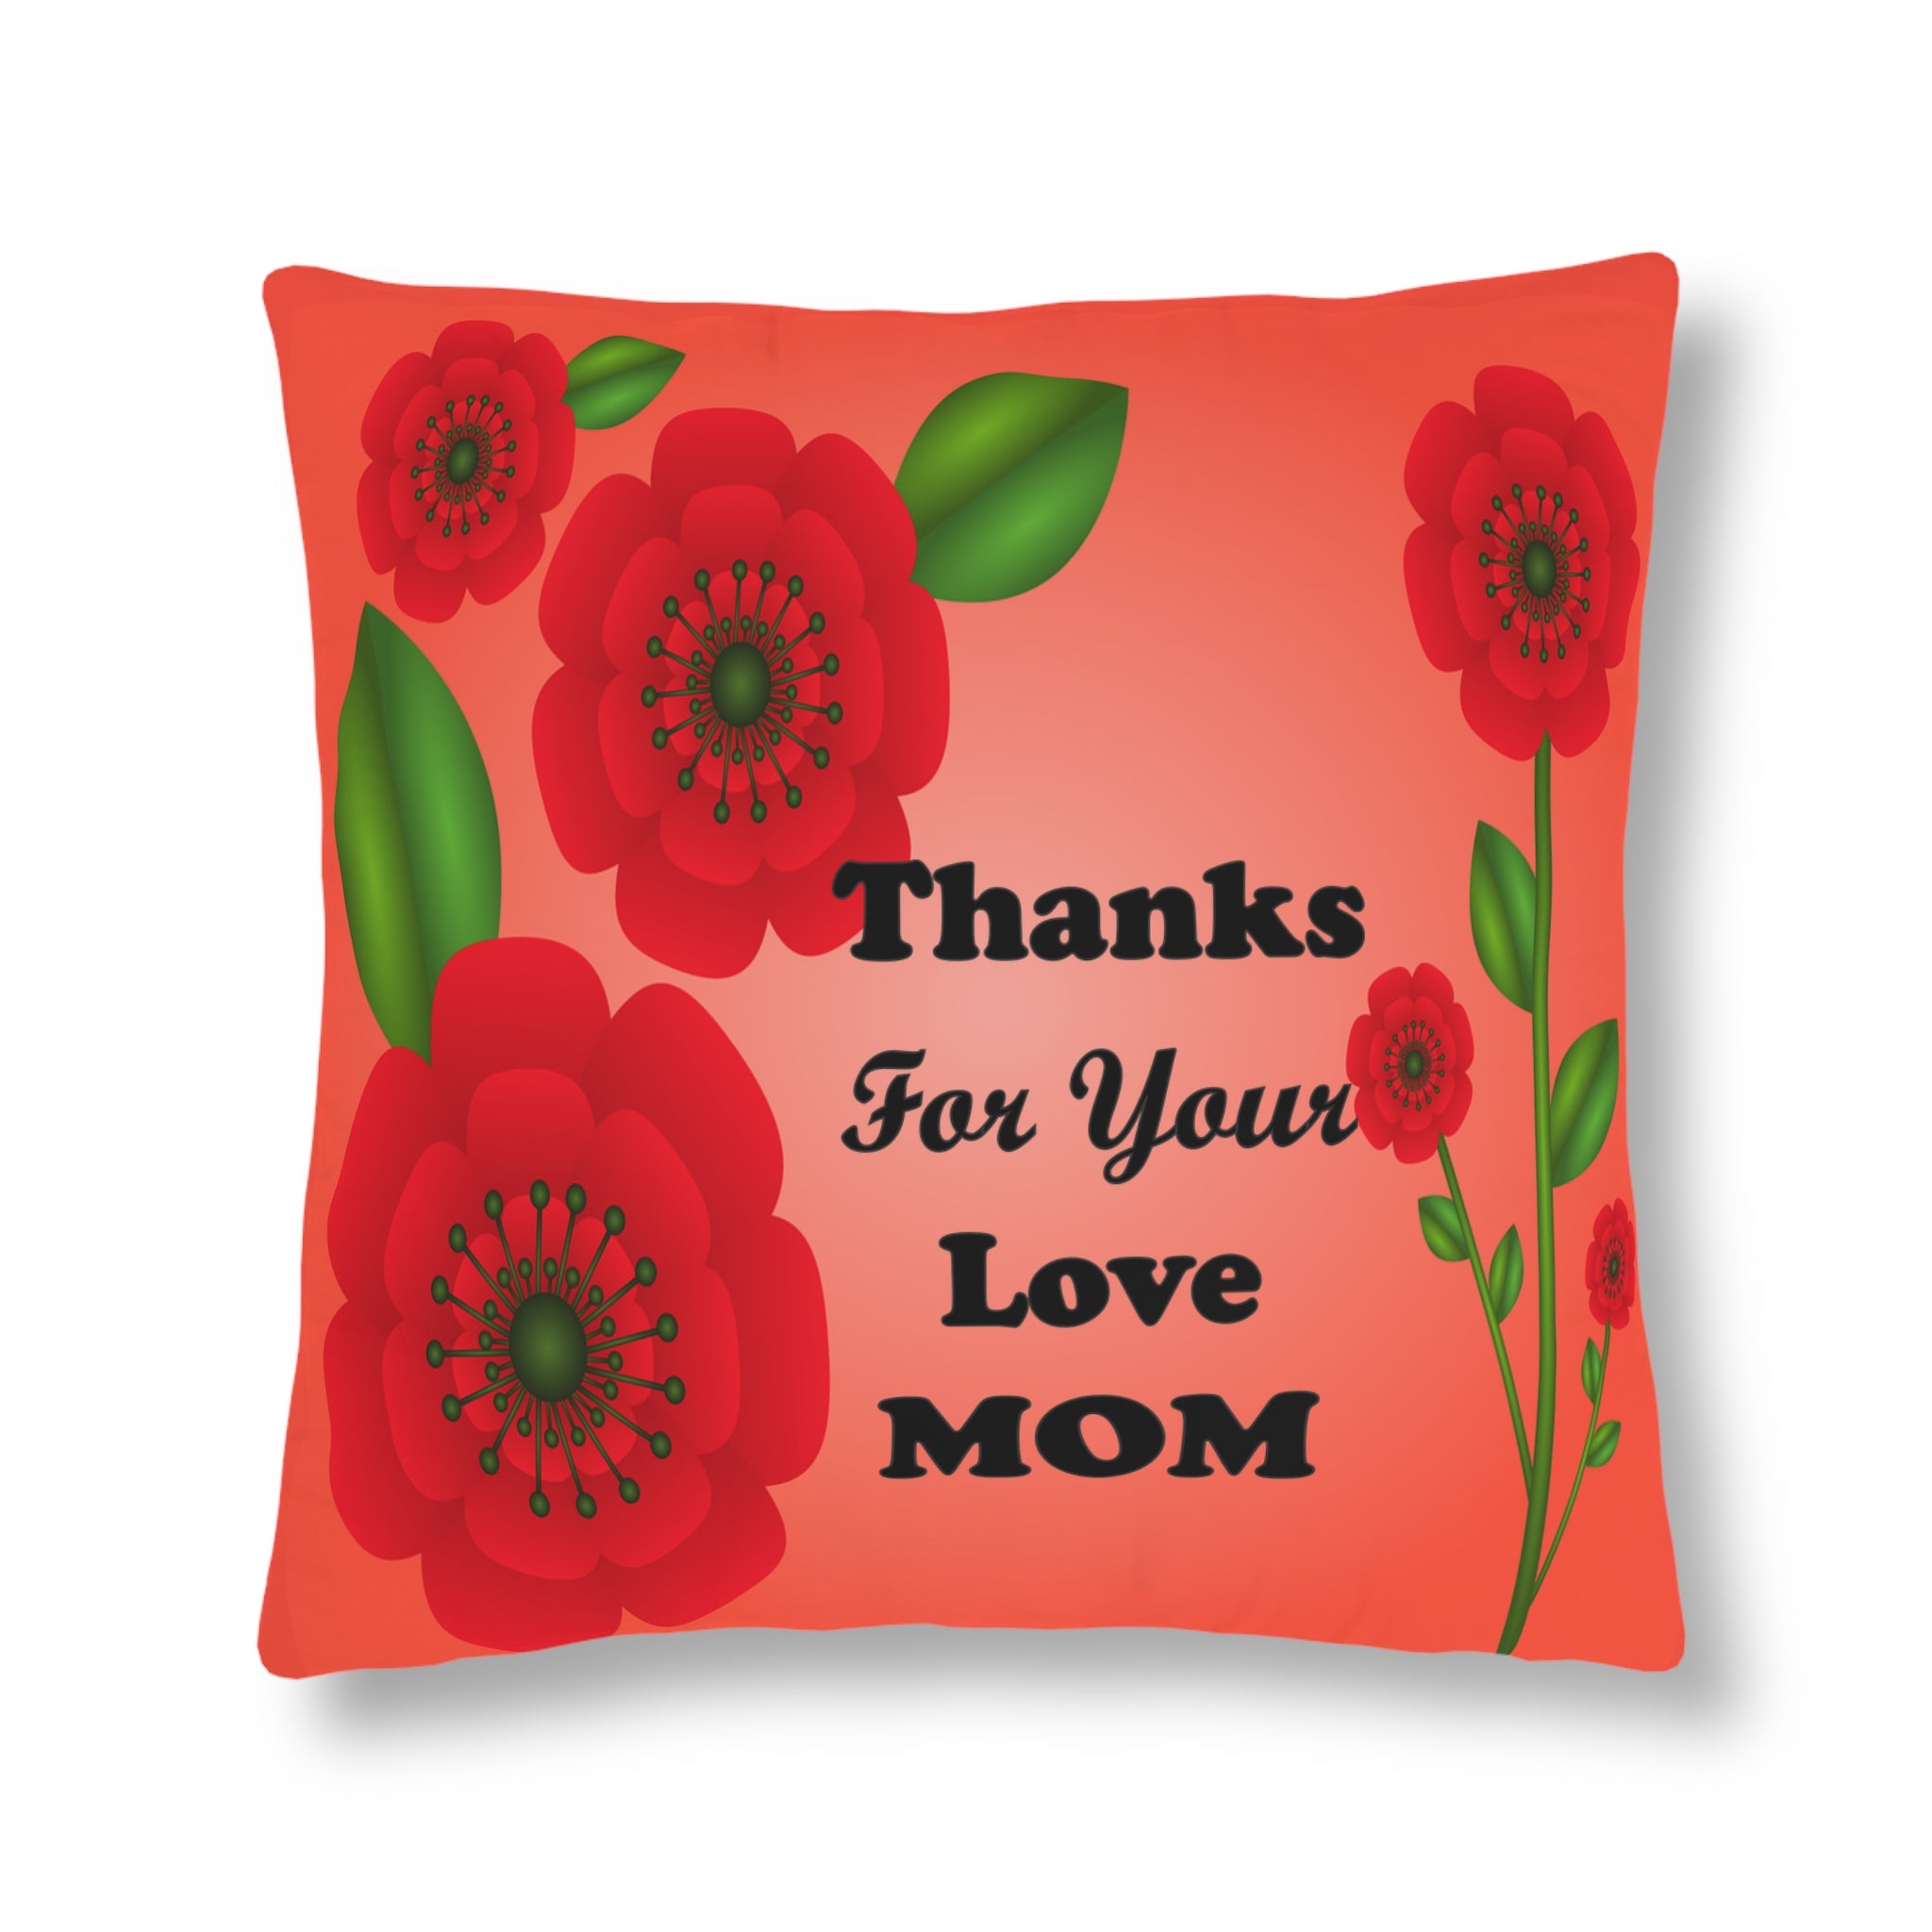 Waterproof Pillows - Thanks For Your Love Mom, Rose